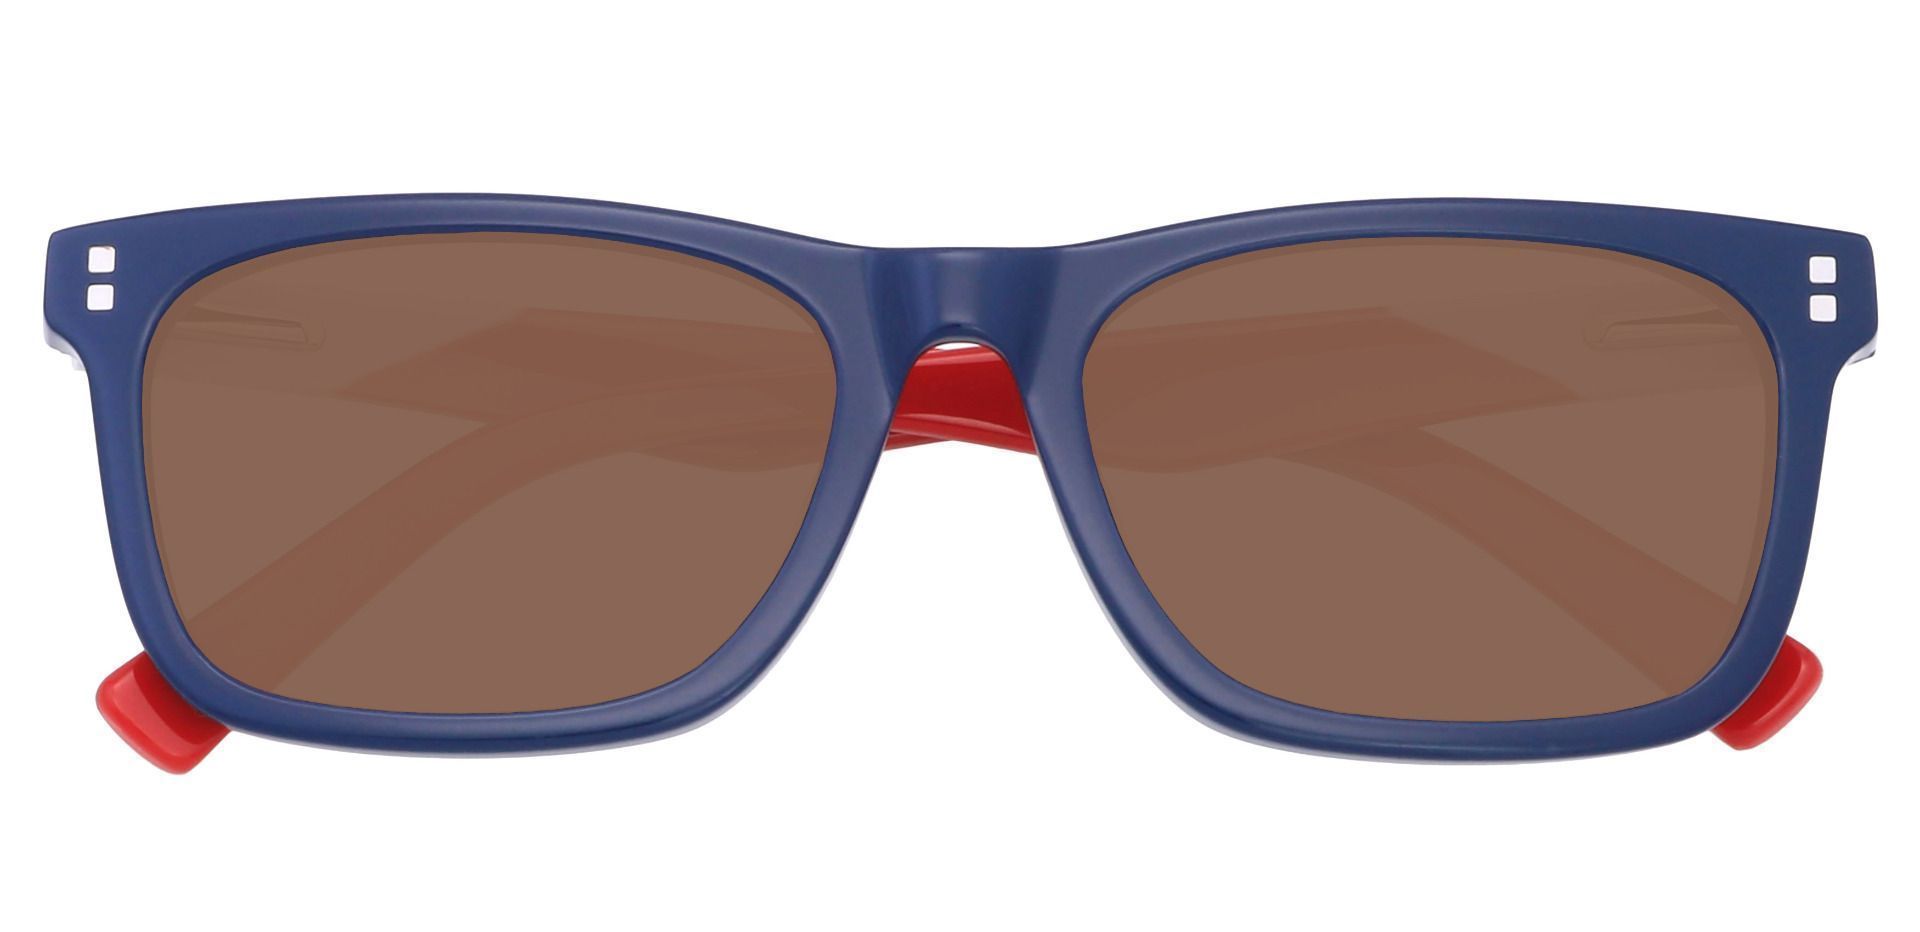 Harbor Rectangle Non-Rx Sunglasses - Blue Frame With Brown Lenses